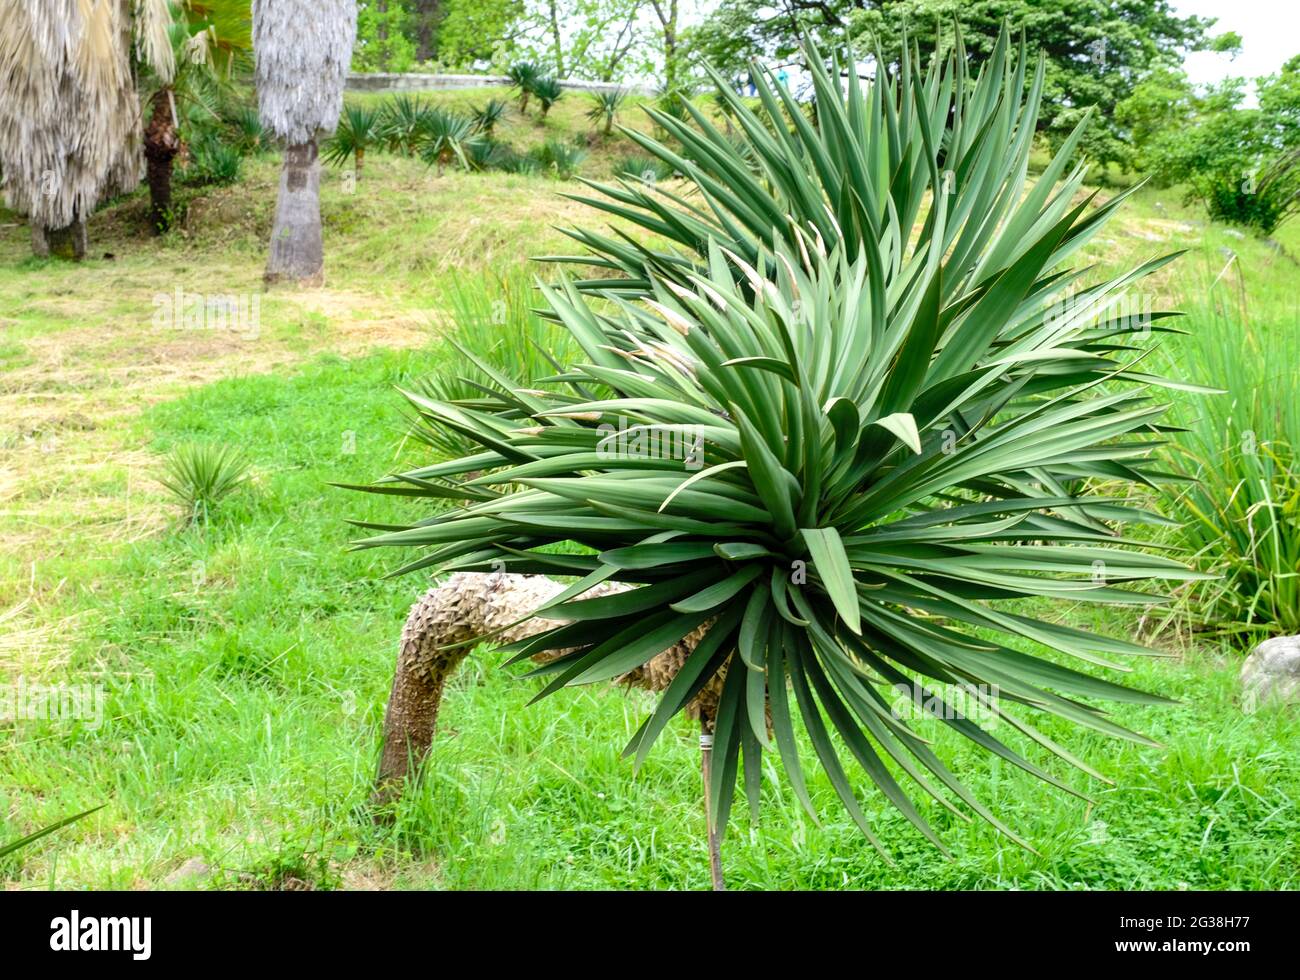 Yucca giant or Yucca elephantipes grows on the island of Tenerife, Spain, the Canary Islands and Europe. Stock Photo